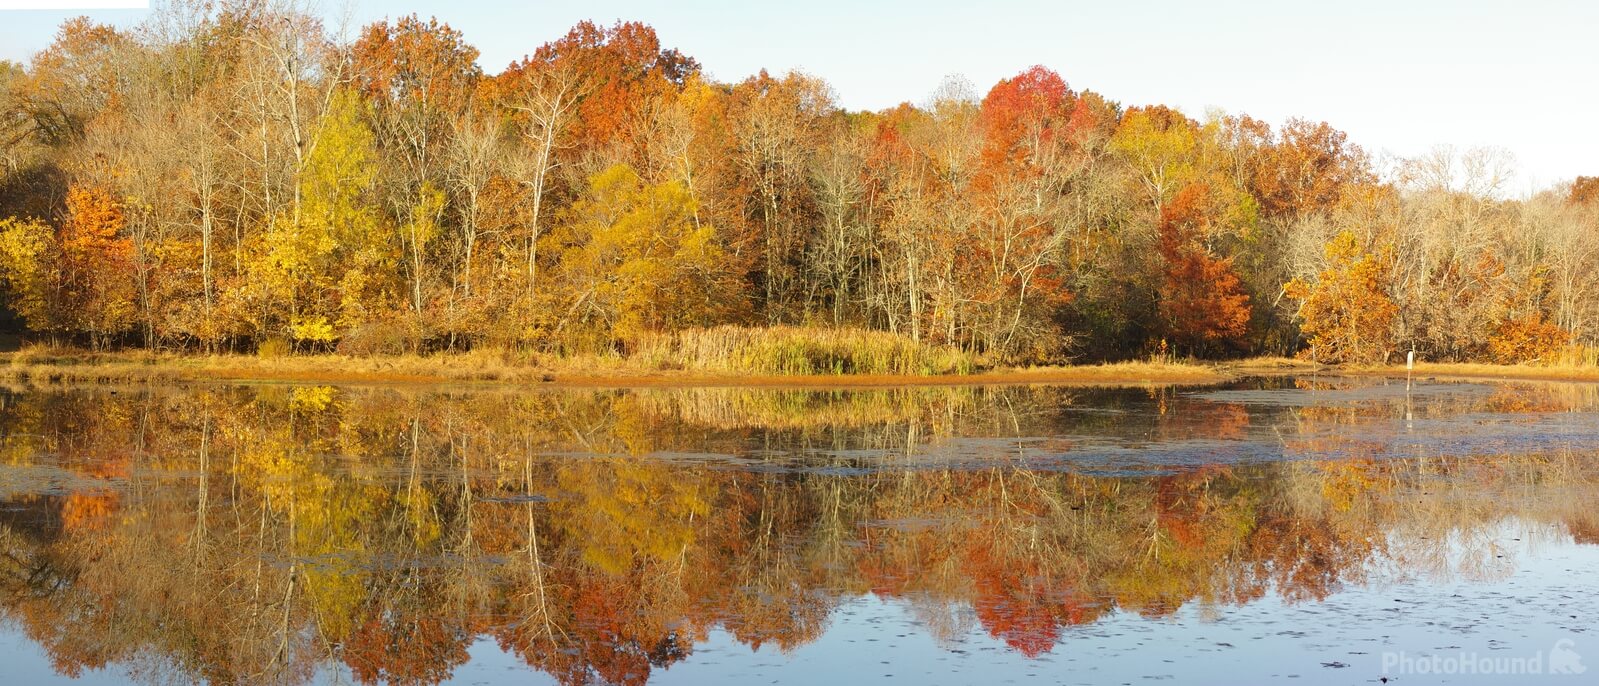 Image of Bledsoe Creek State Park by Ralph Troutman